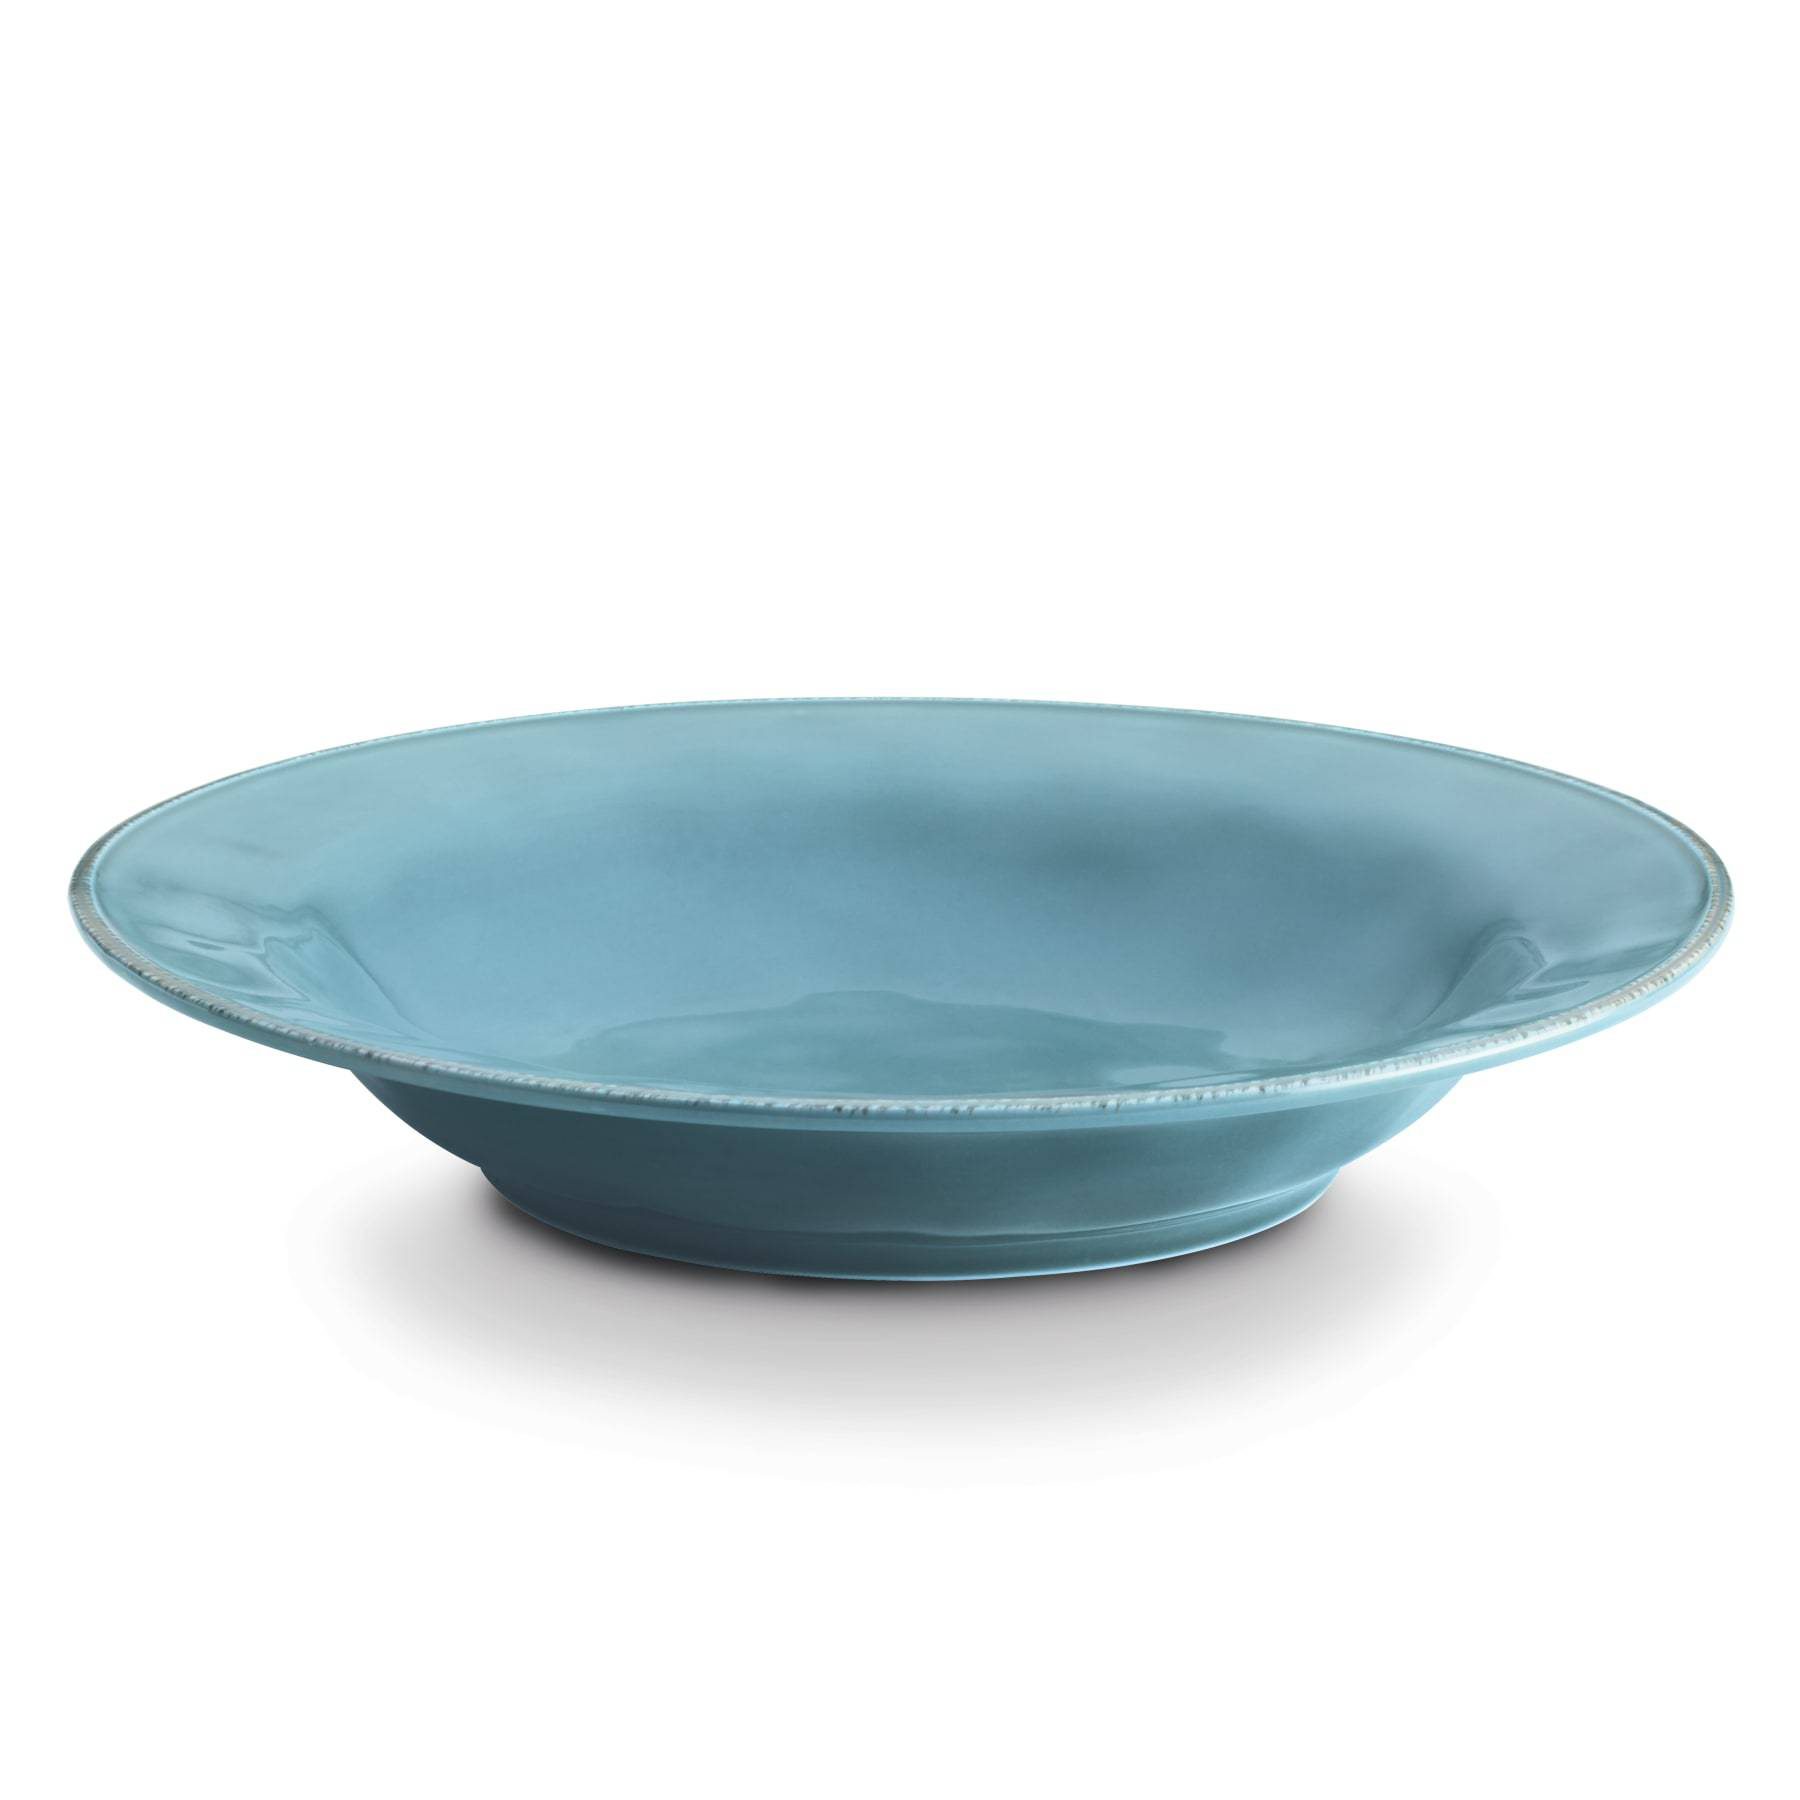 14-Inch Round Serving Bowl in Agave Blue